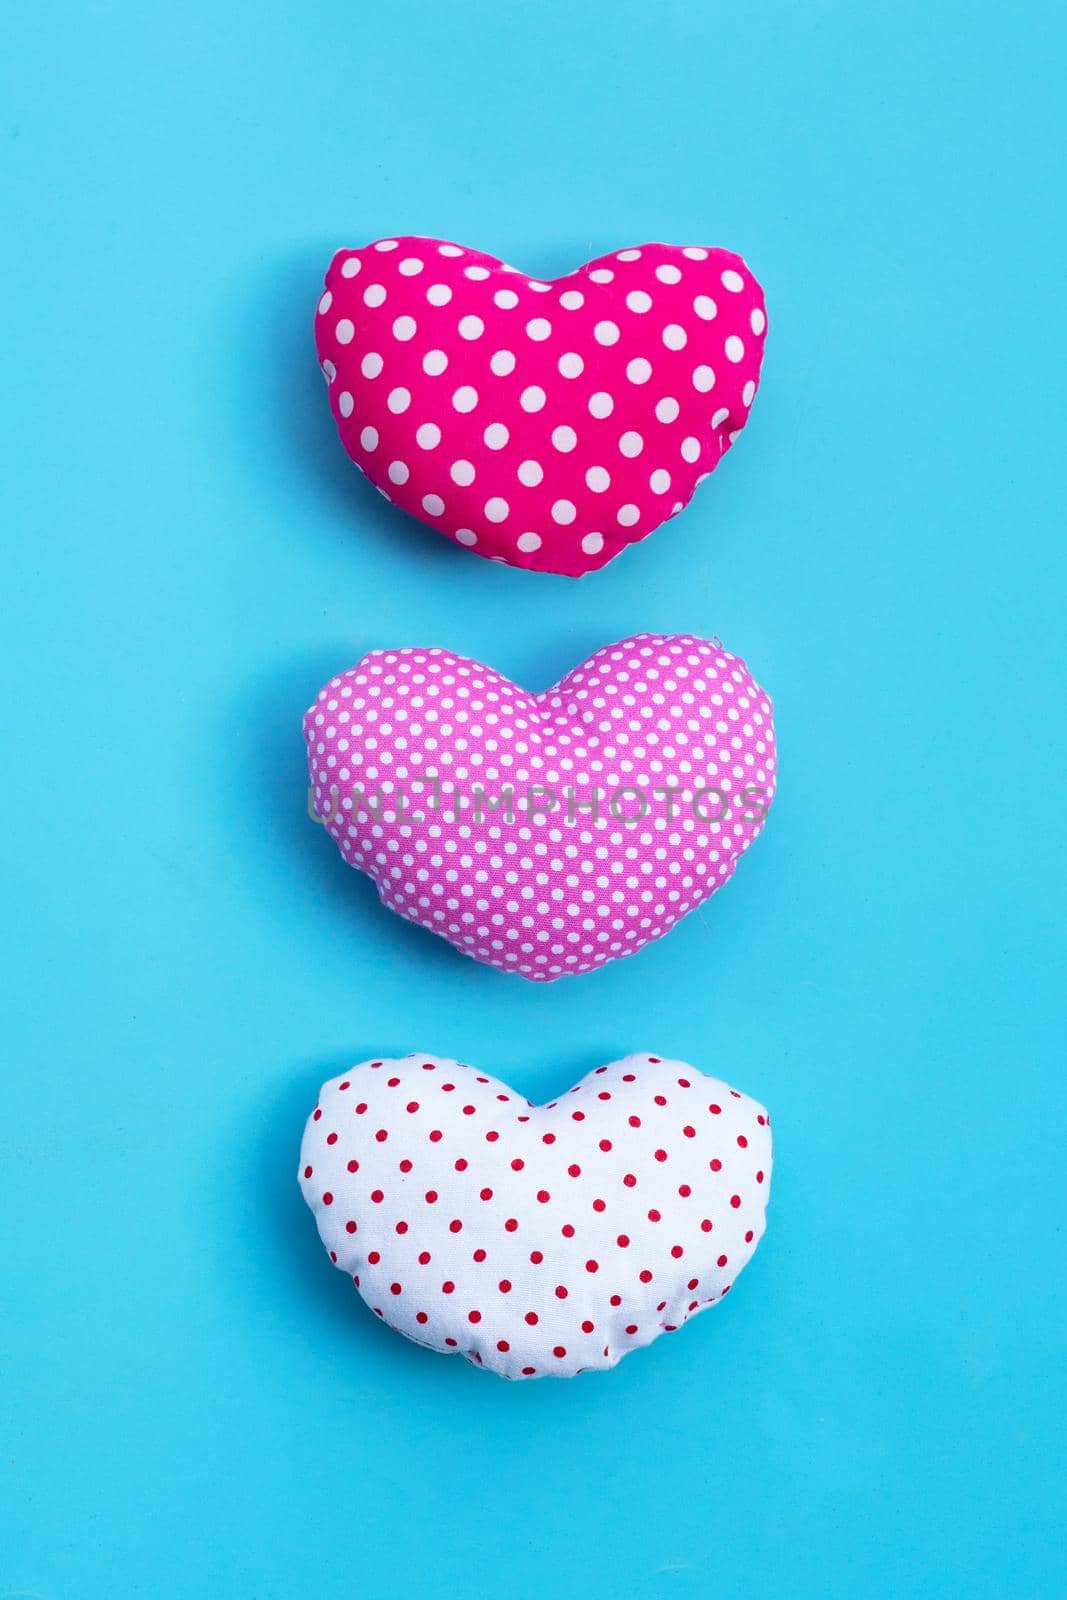 Valentine's hearts on blue background.  by Bowonpat